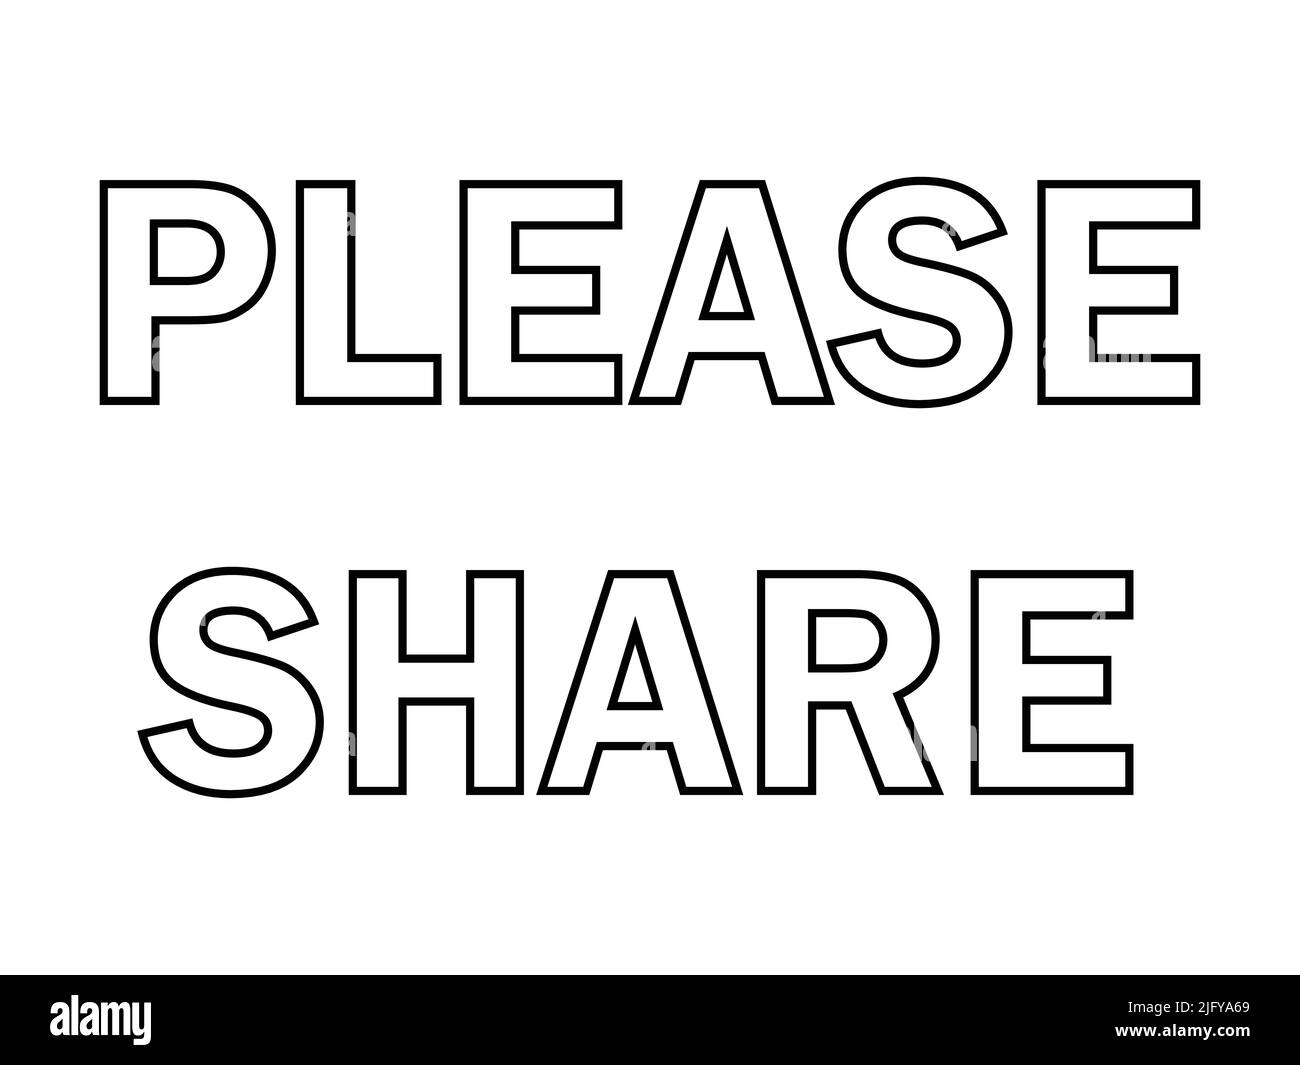 Please share, text words with white background Stock Vector